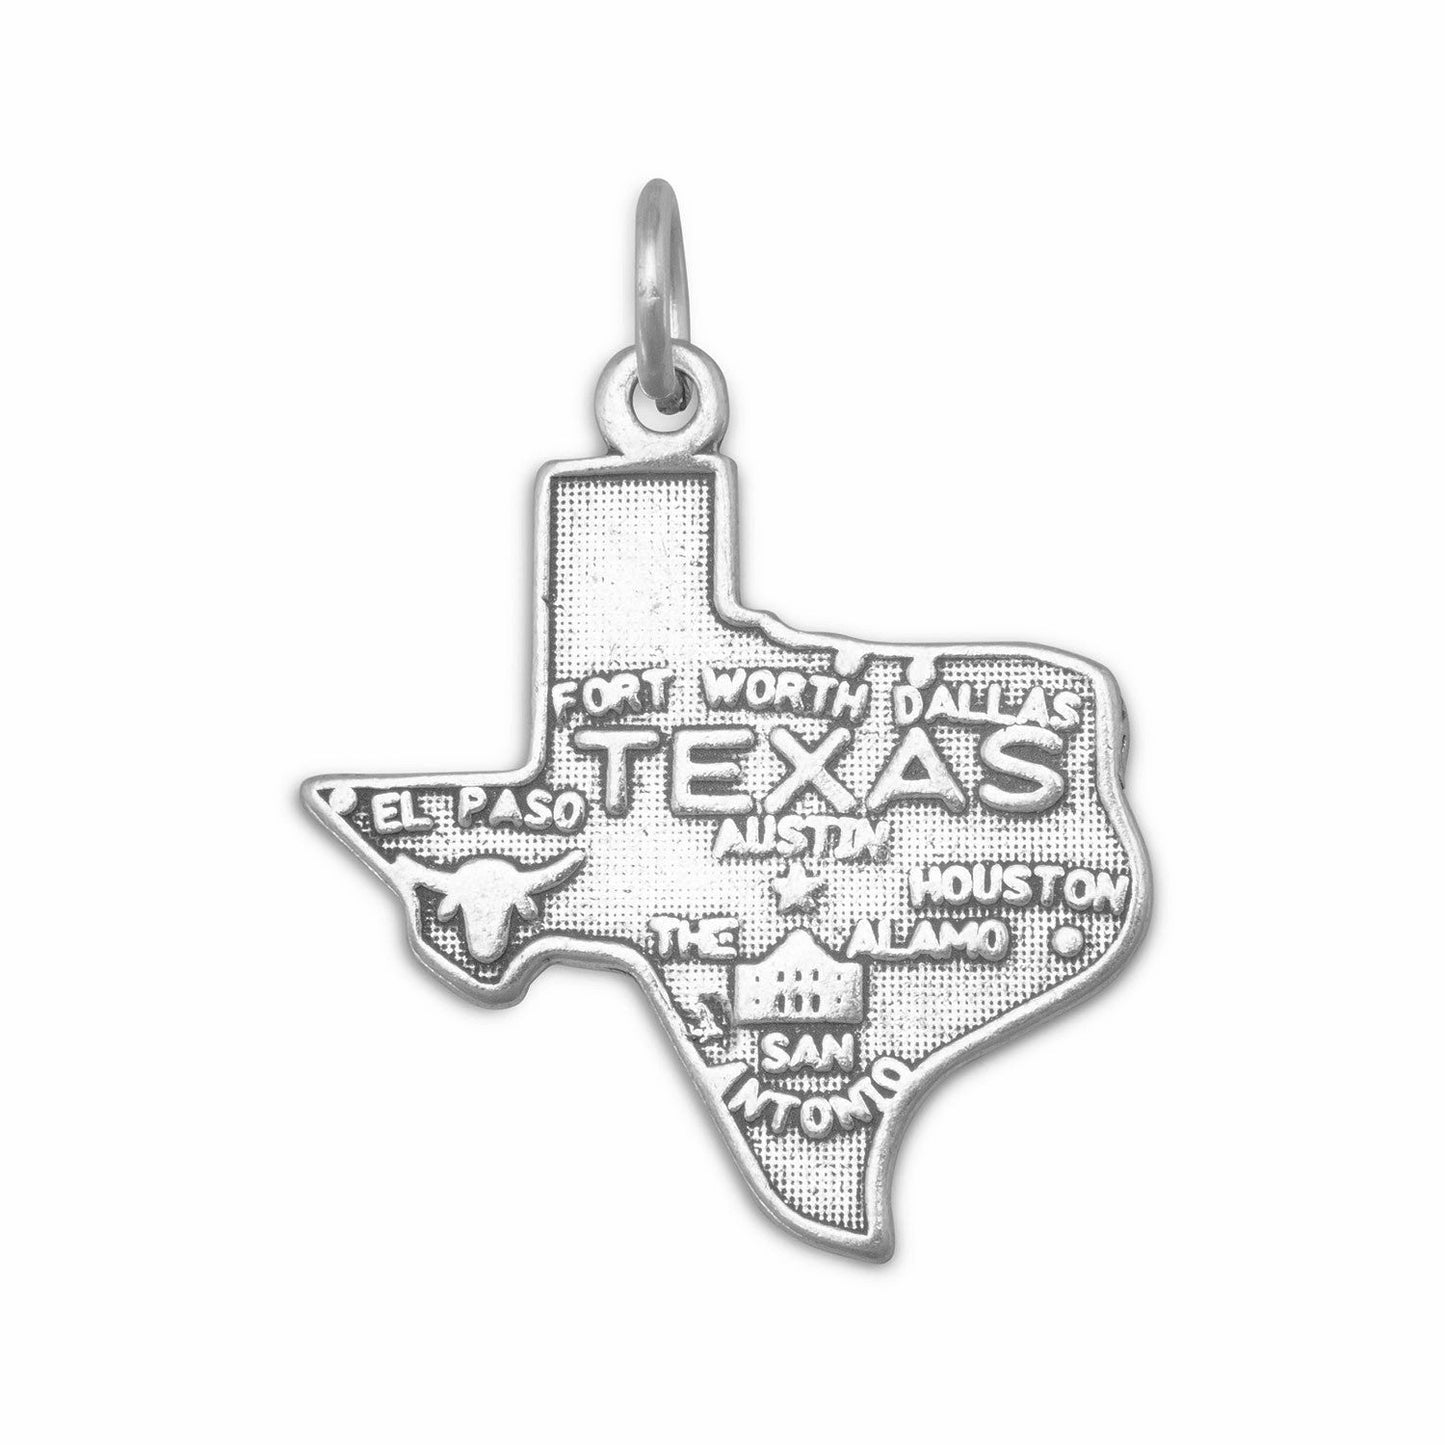 Oxidized Sterling Silver Texas State Charm, Made in USA